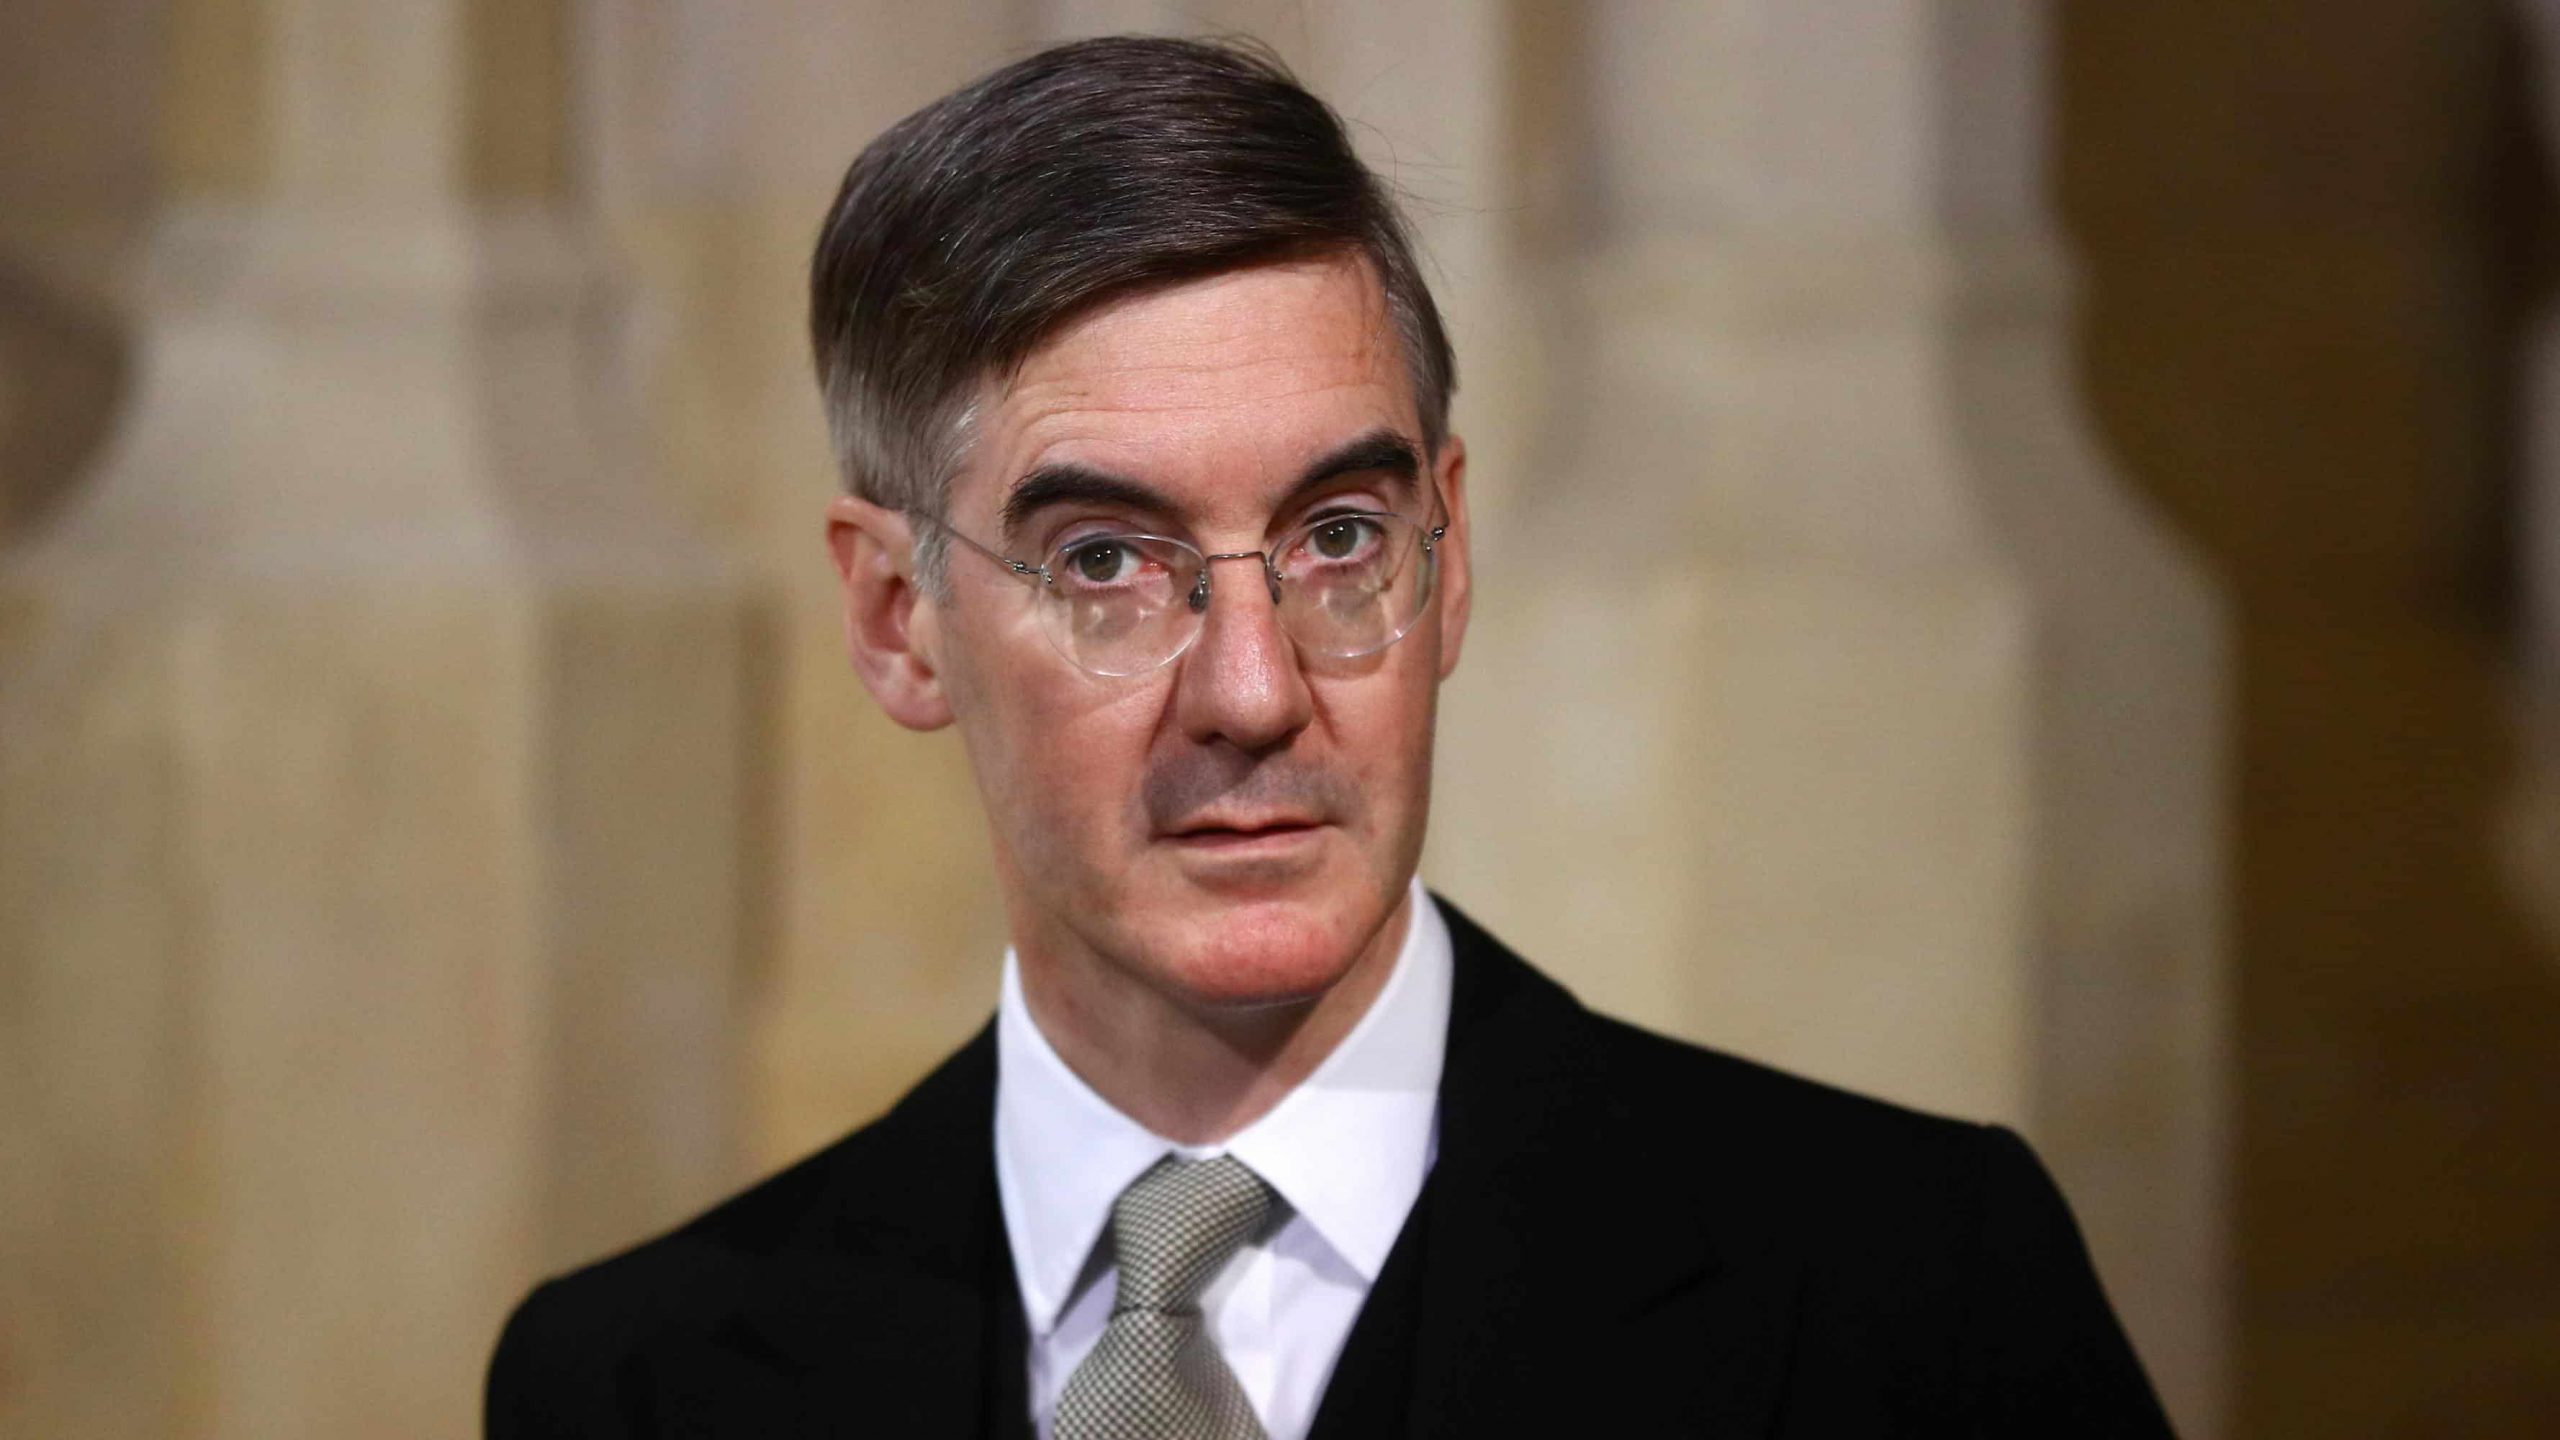 Jacob Rees-Mogg “profoundly” apologises for Grenfell comments